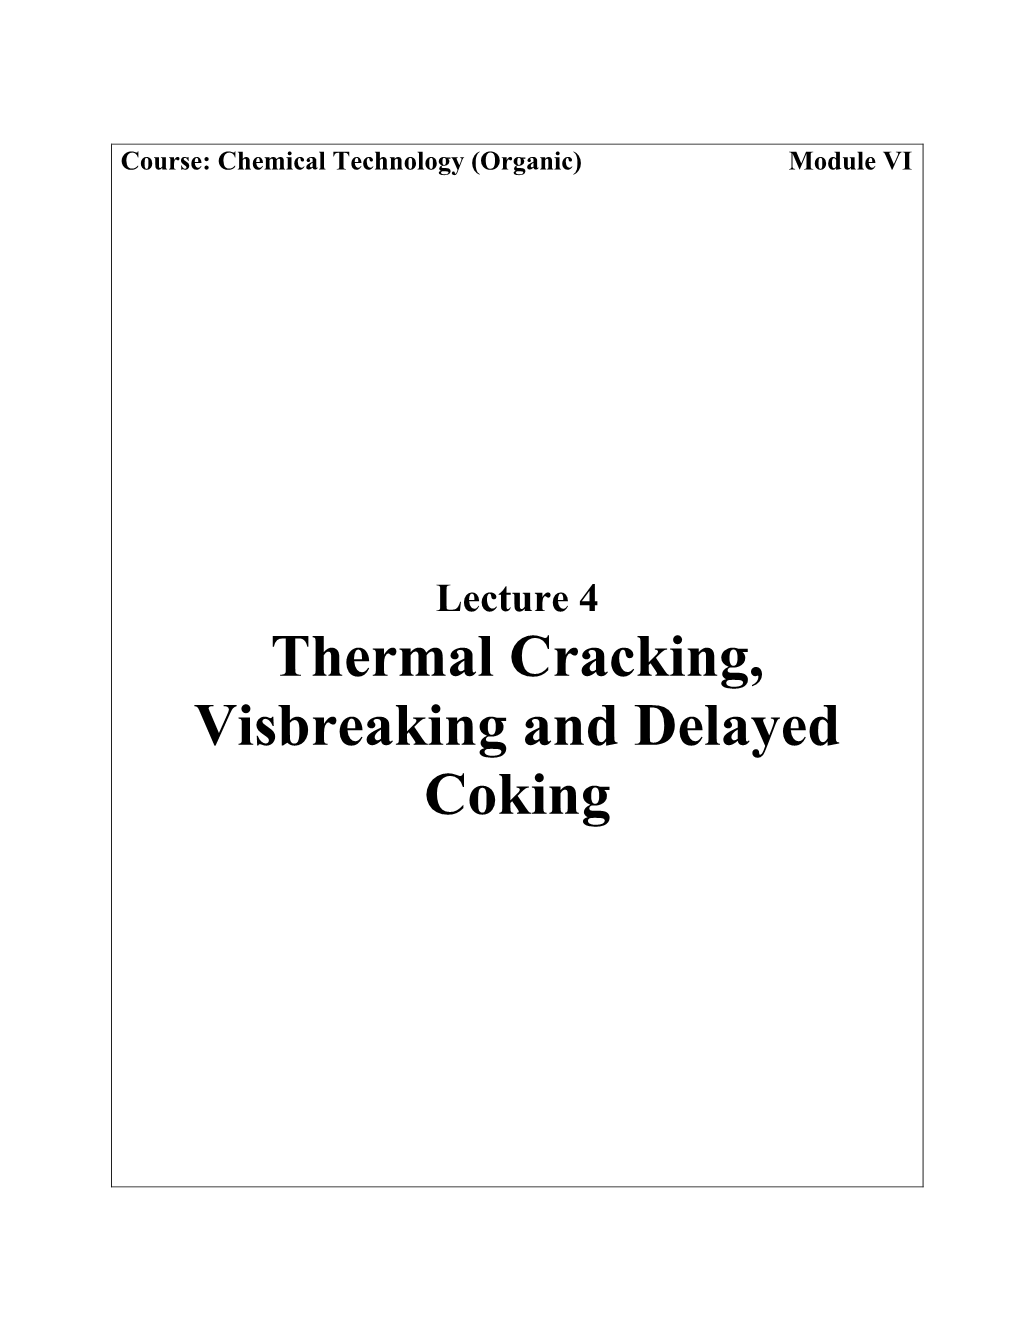 Thermal Cracking, Visbreaking and Delayed Coking